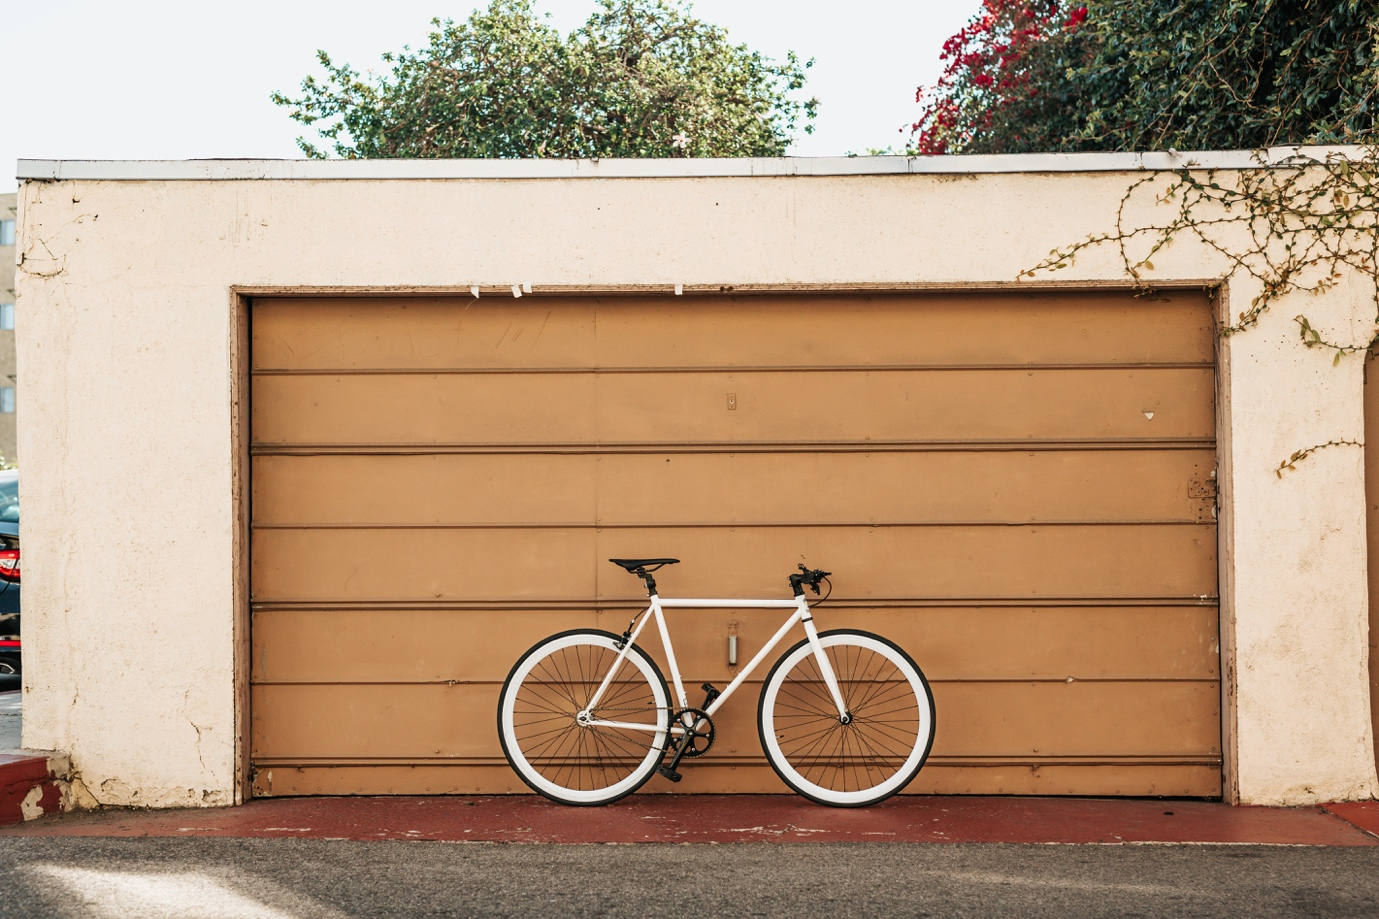 A bicycle parked outside a garage door